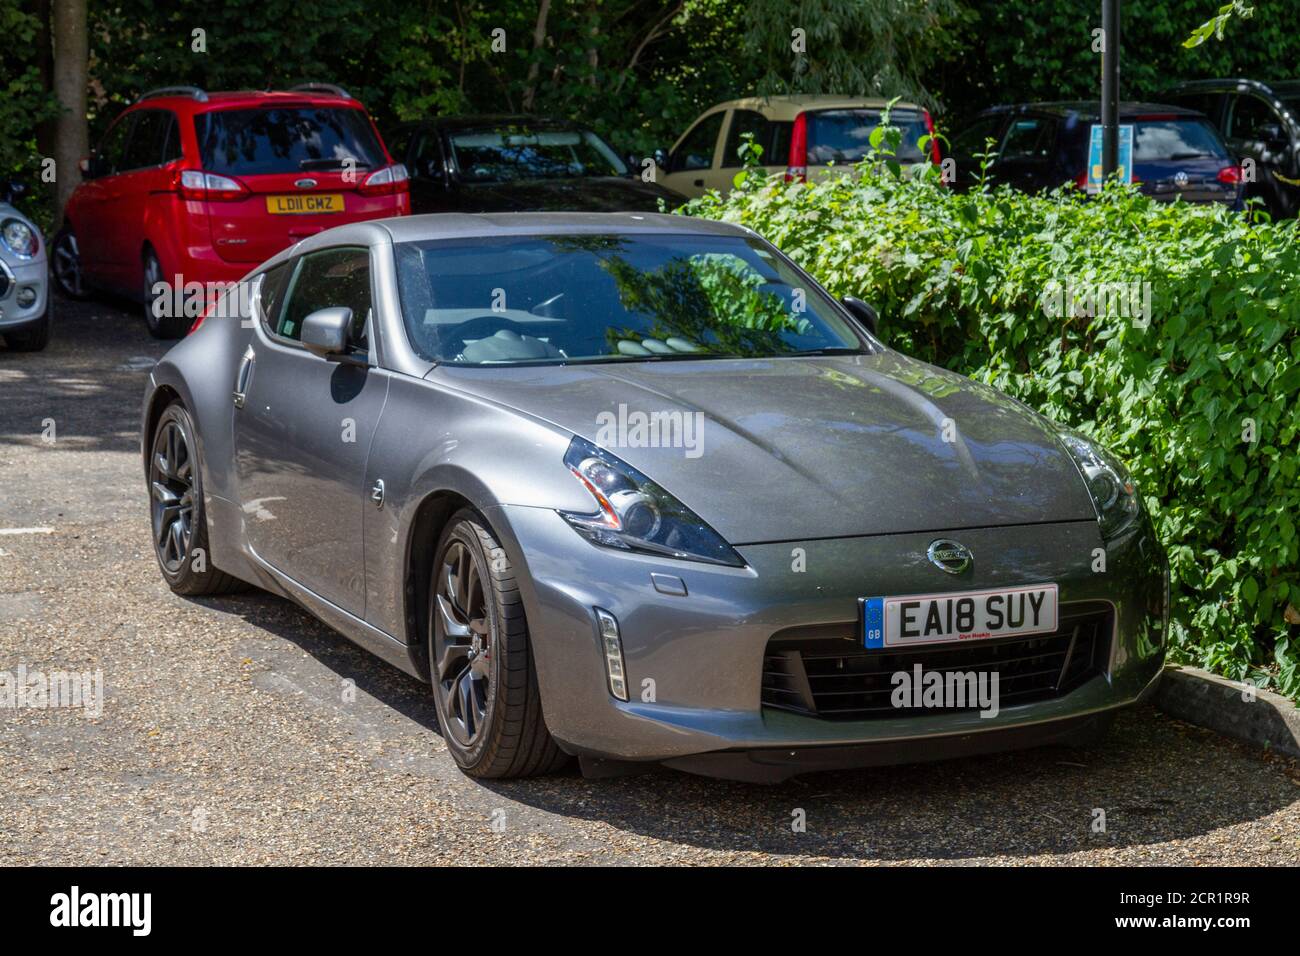 A Nissan 370Z, a 2-door, 2-seater sports car parked in a car park in Saffron Walden, Essex, UK. Stock Photo